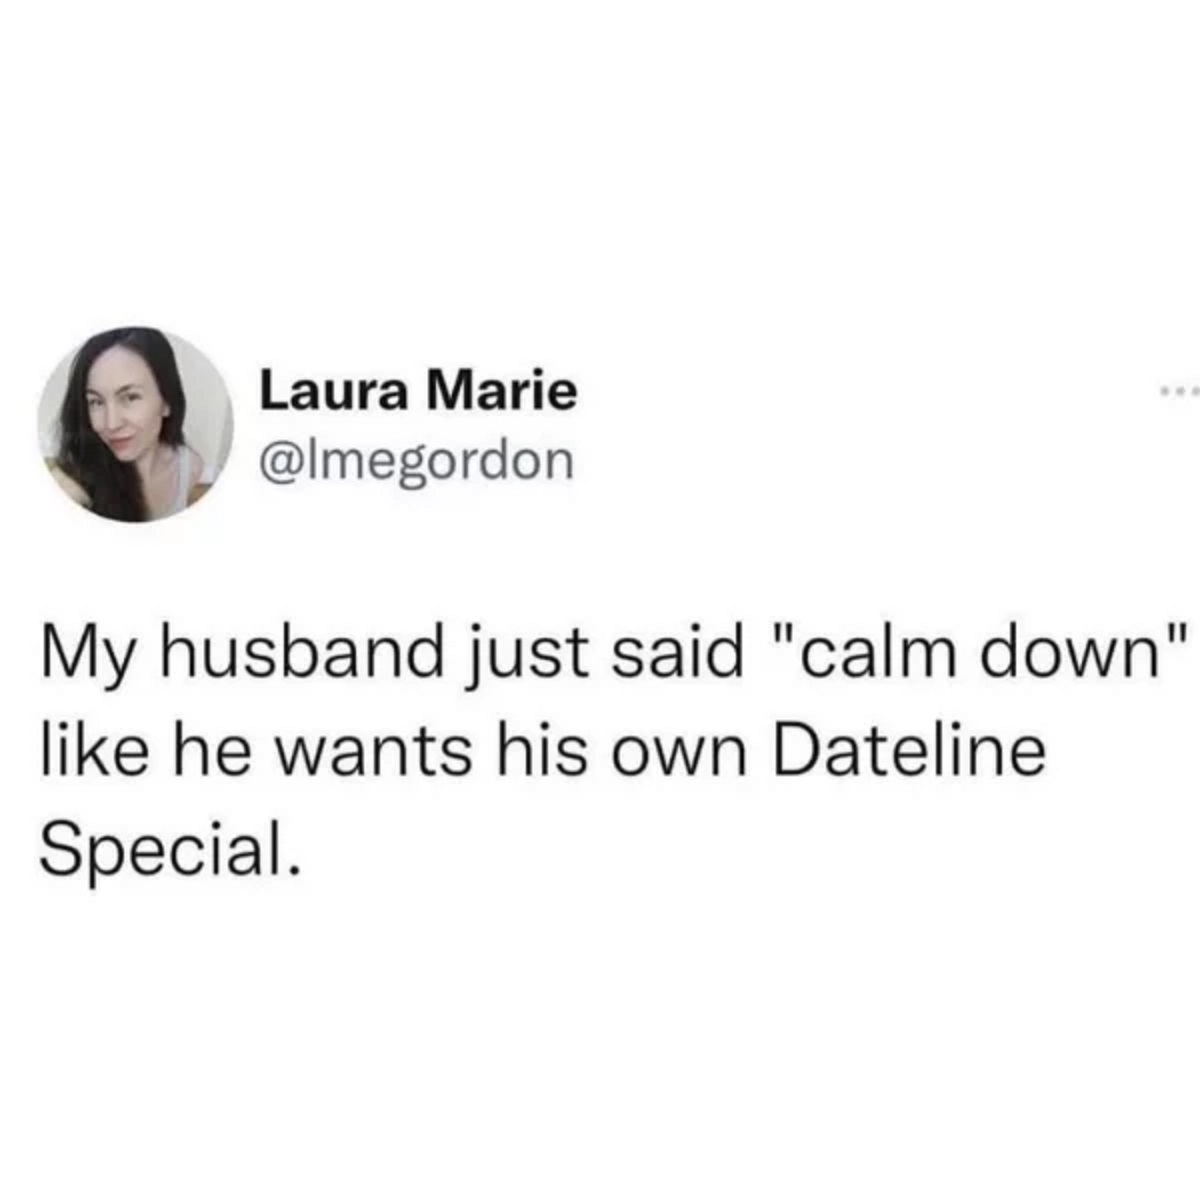 Laura Marie My husband just said "calm down" he wants his own Dateline Special.